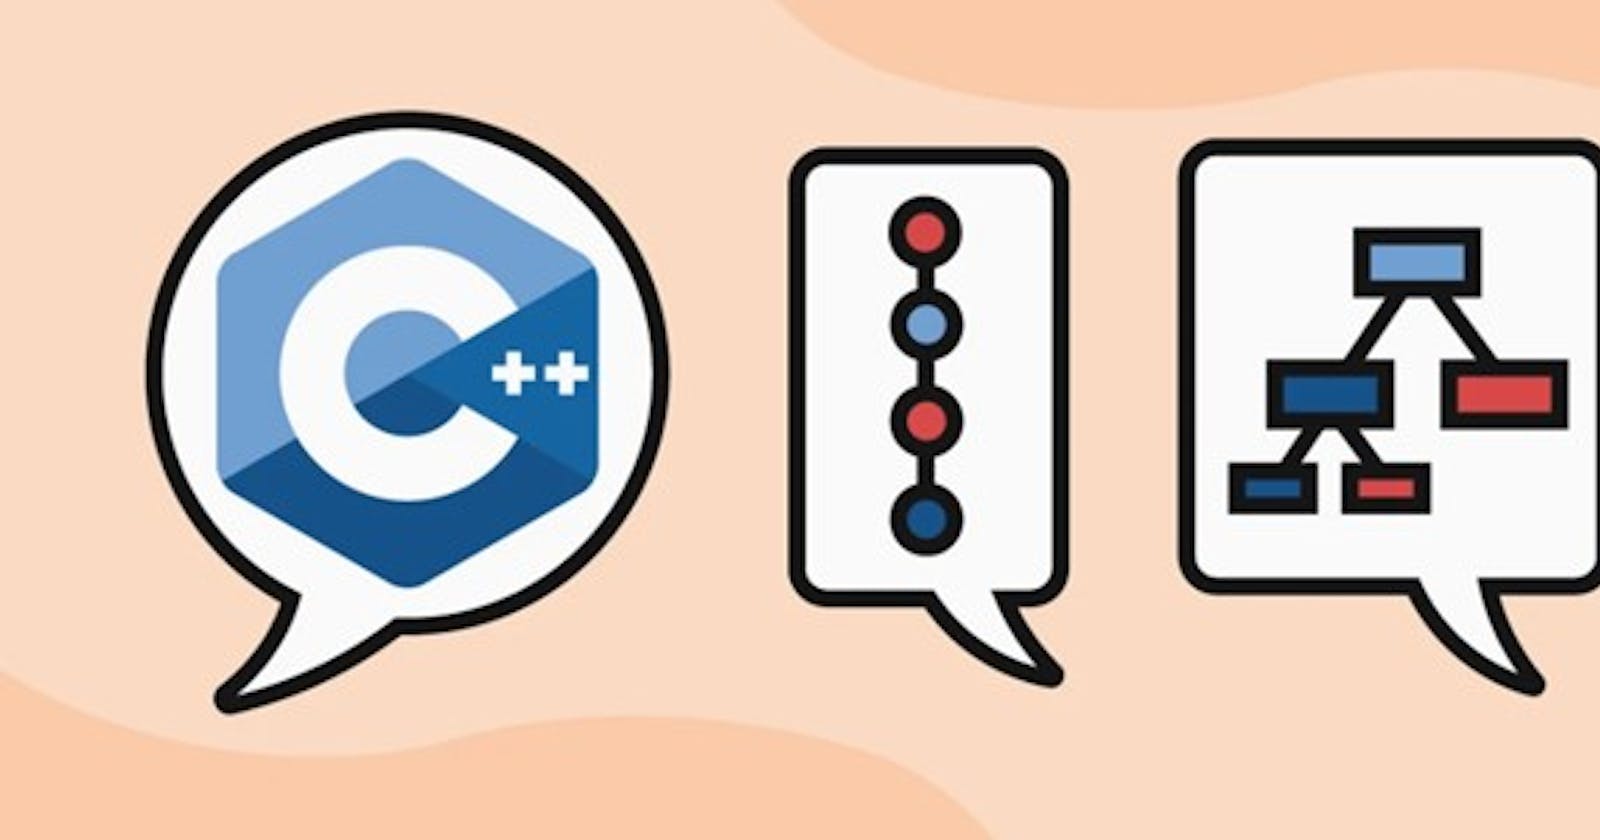 9 C++ data structures you need to know for your coding interview